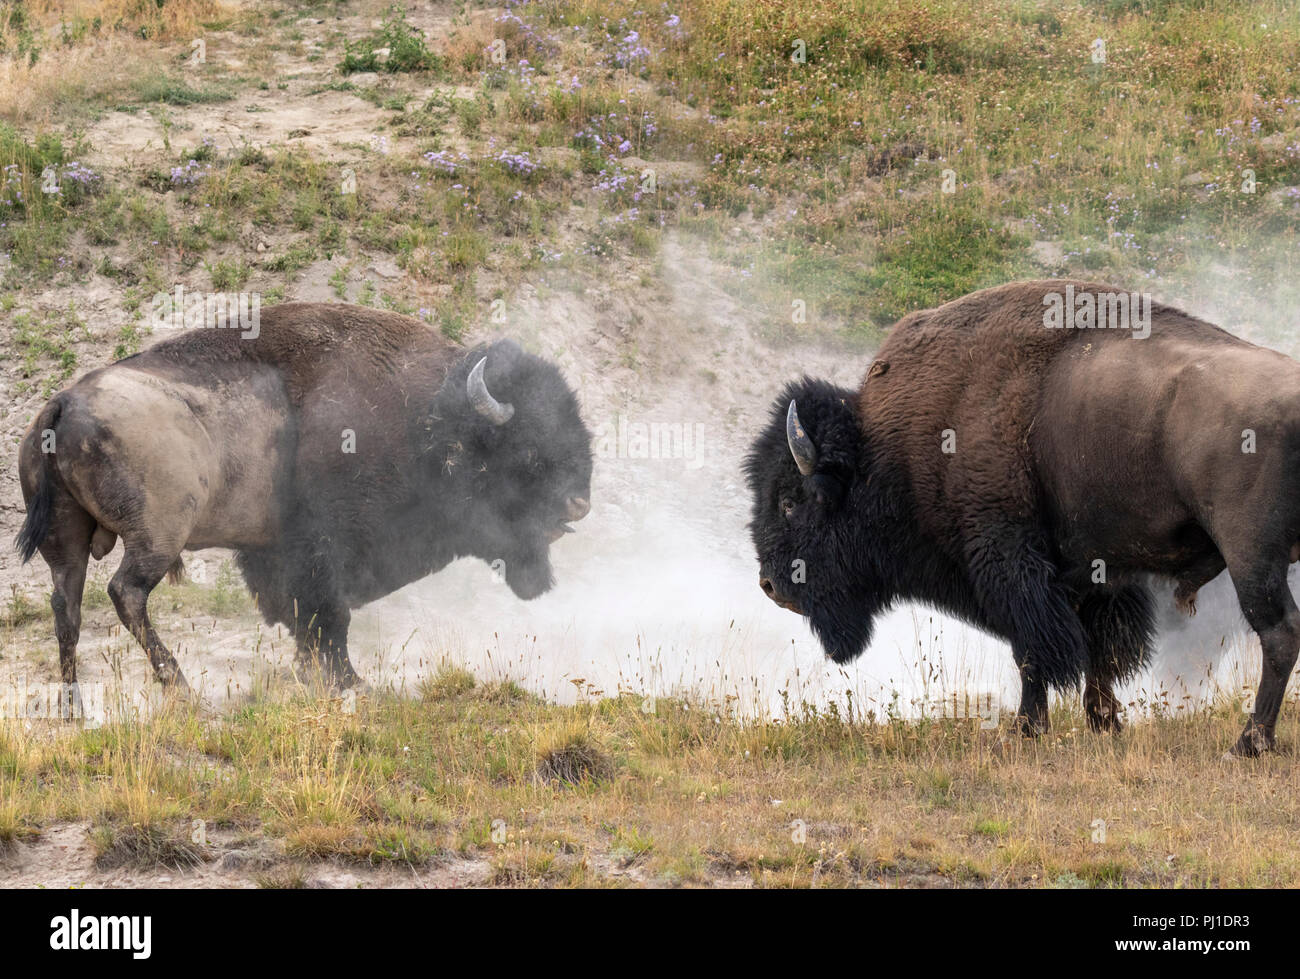 American bison (Bison bison) males conflicting during rut season, Yellowstone National park, Wyoming, USA. Stock Photo